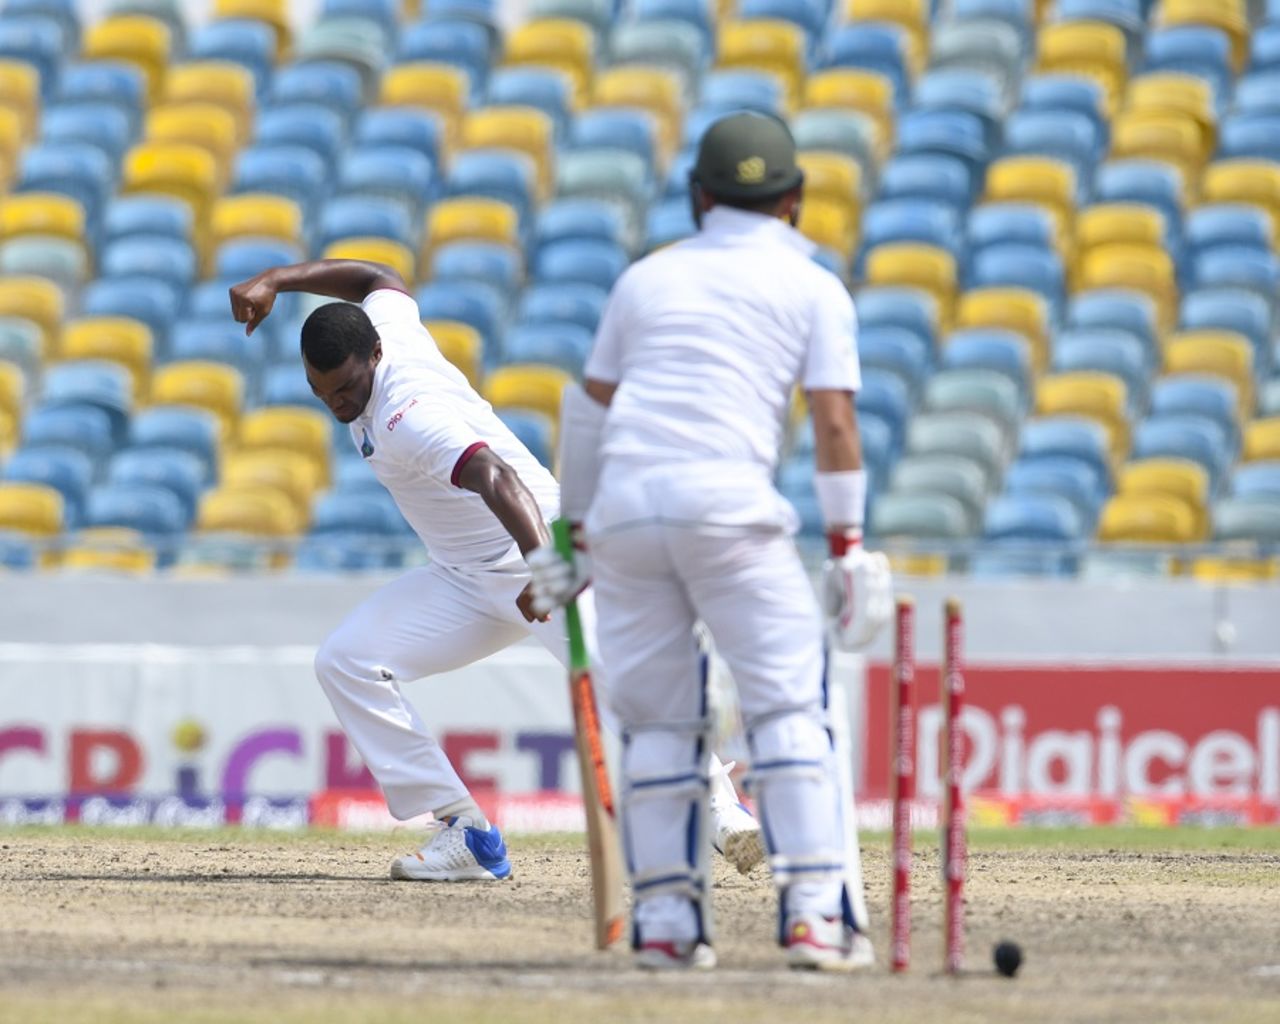 Yasir Shah is bowled by Shannon Gabriel, West Indies v Pakistan, 2nd Test, Bridgetown, 5th day, May 4, 2017